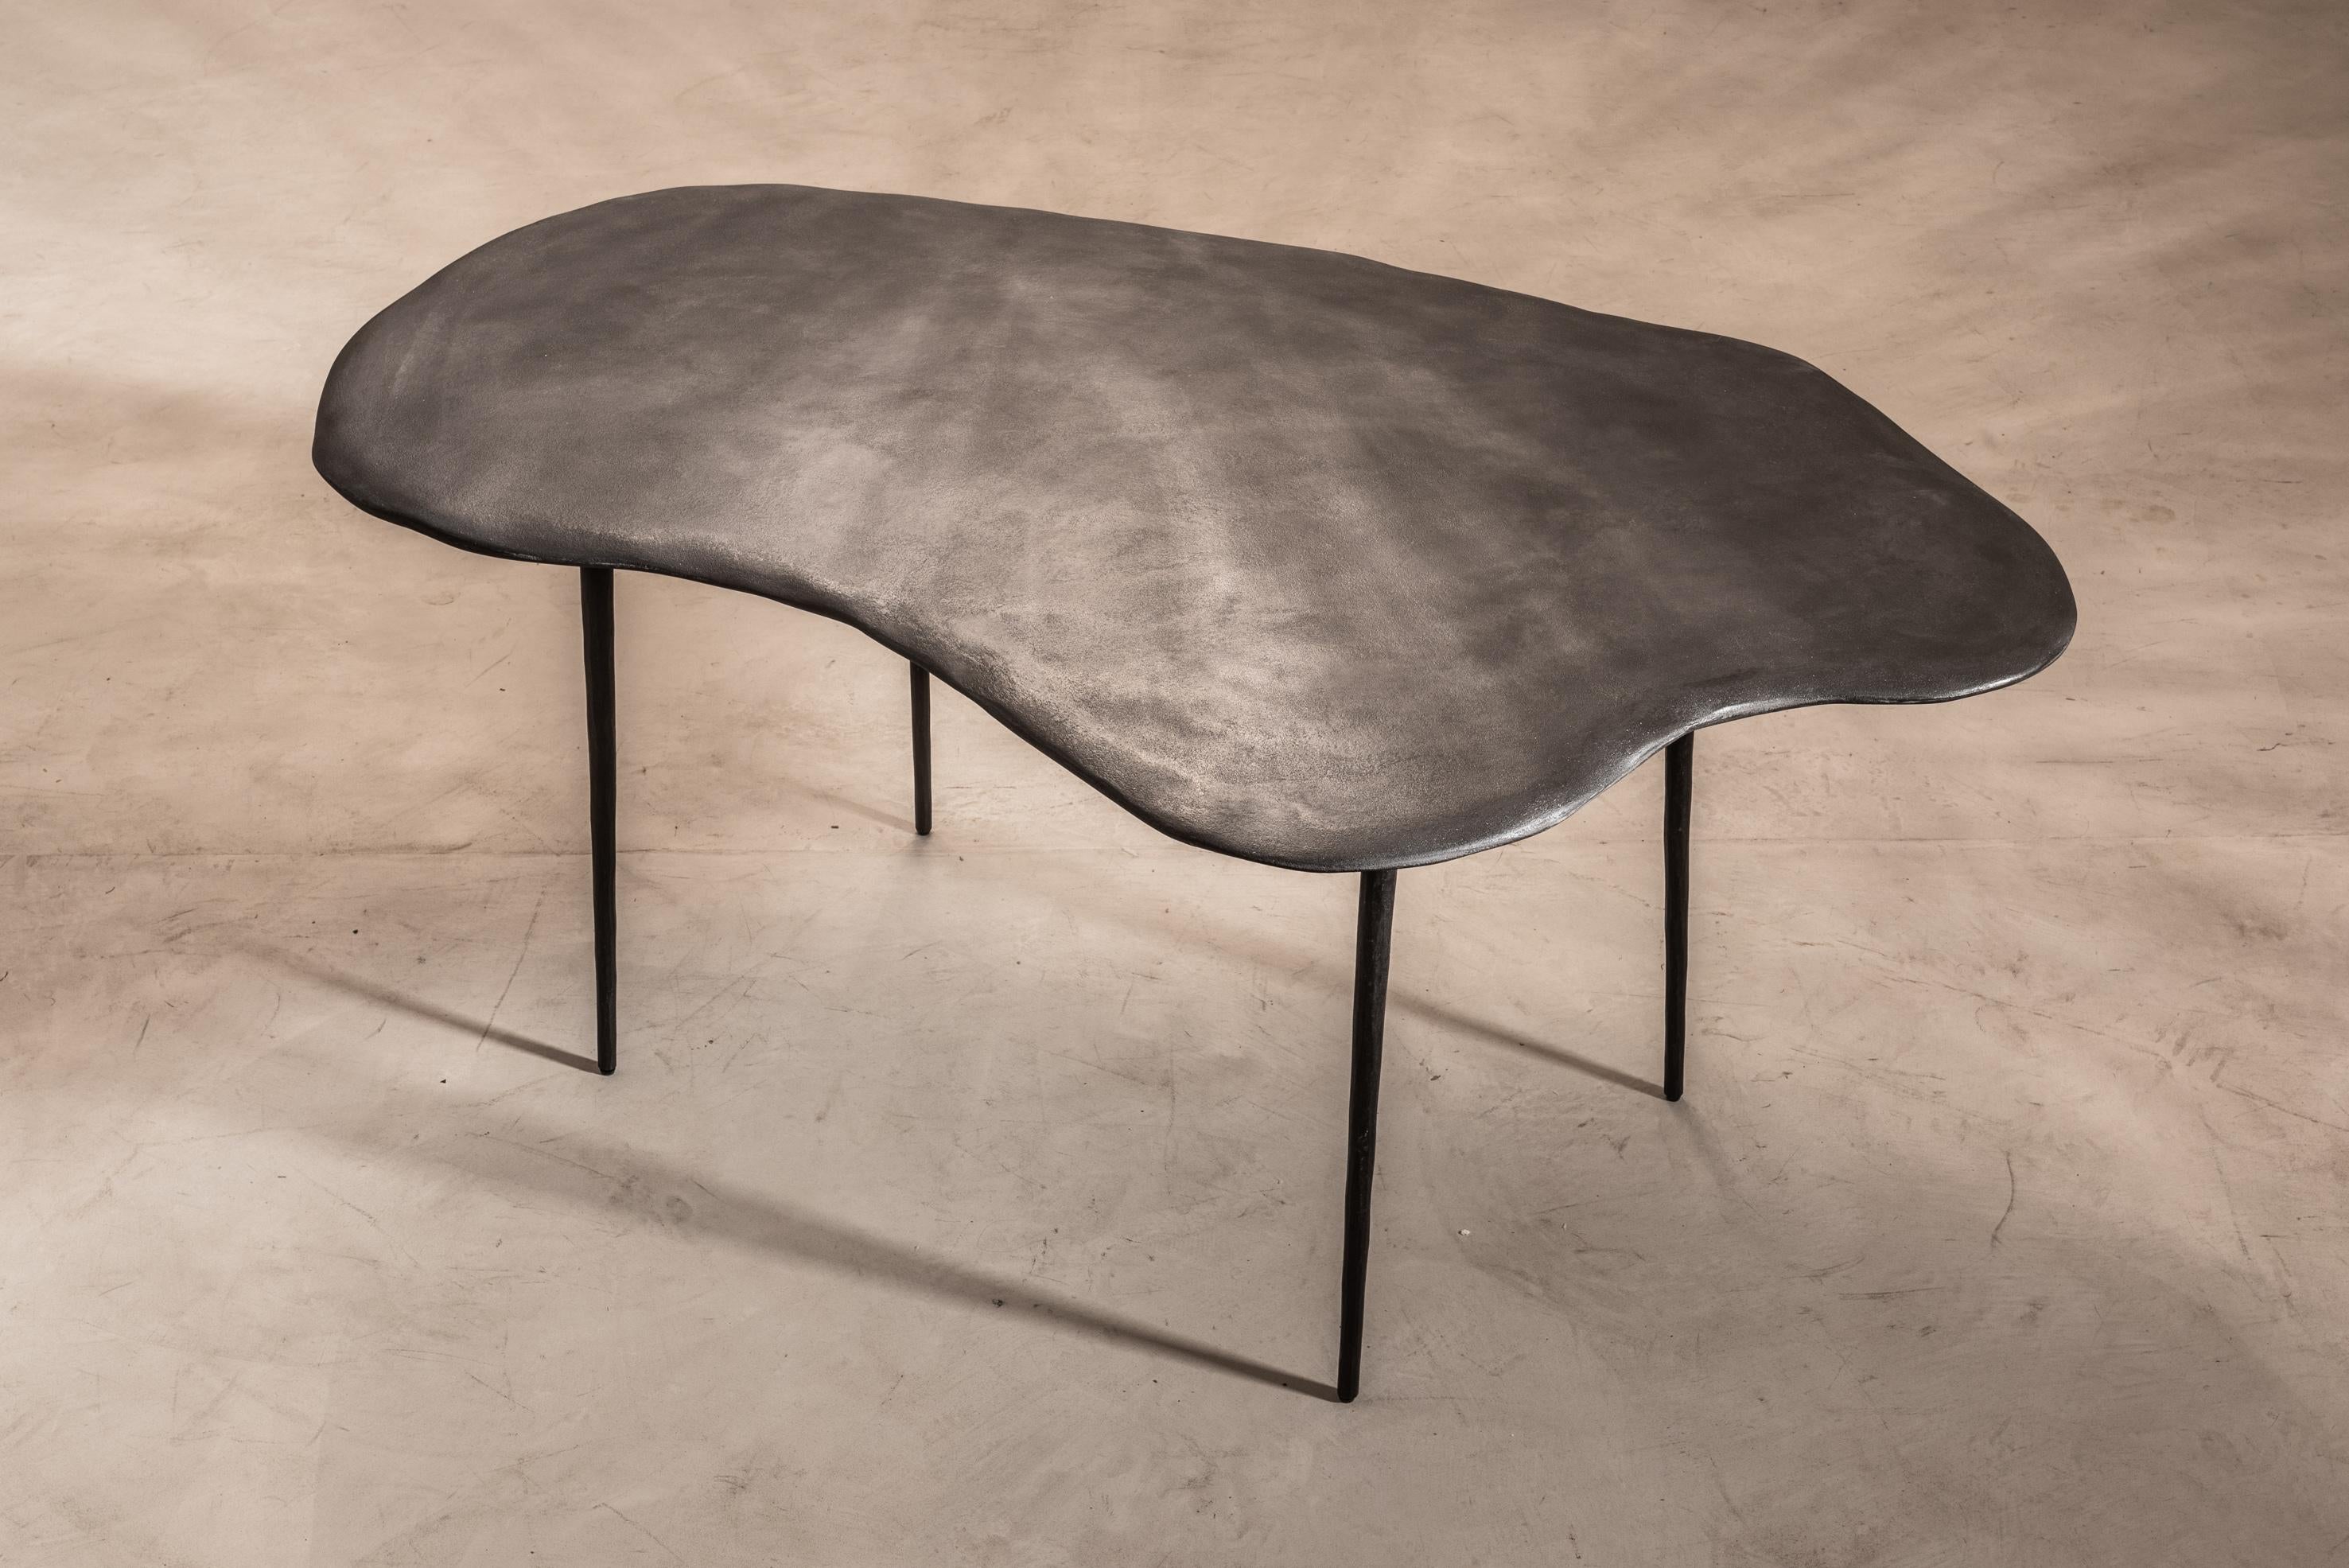 Varenna table A by Studio Emblématique
Dimensions: W 162 x D 95 x H 76 cm
Materials: Stone grain table top with conical metal hammered legs

Pushing the boundaries, going the extra mile to find the extraordinary piece that defines the space.